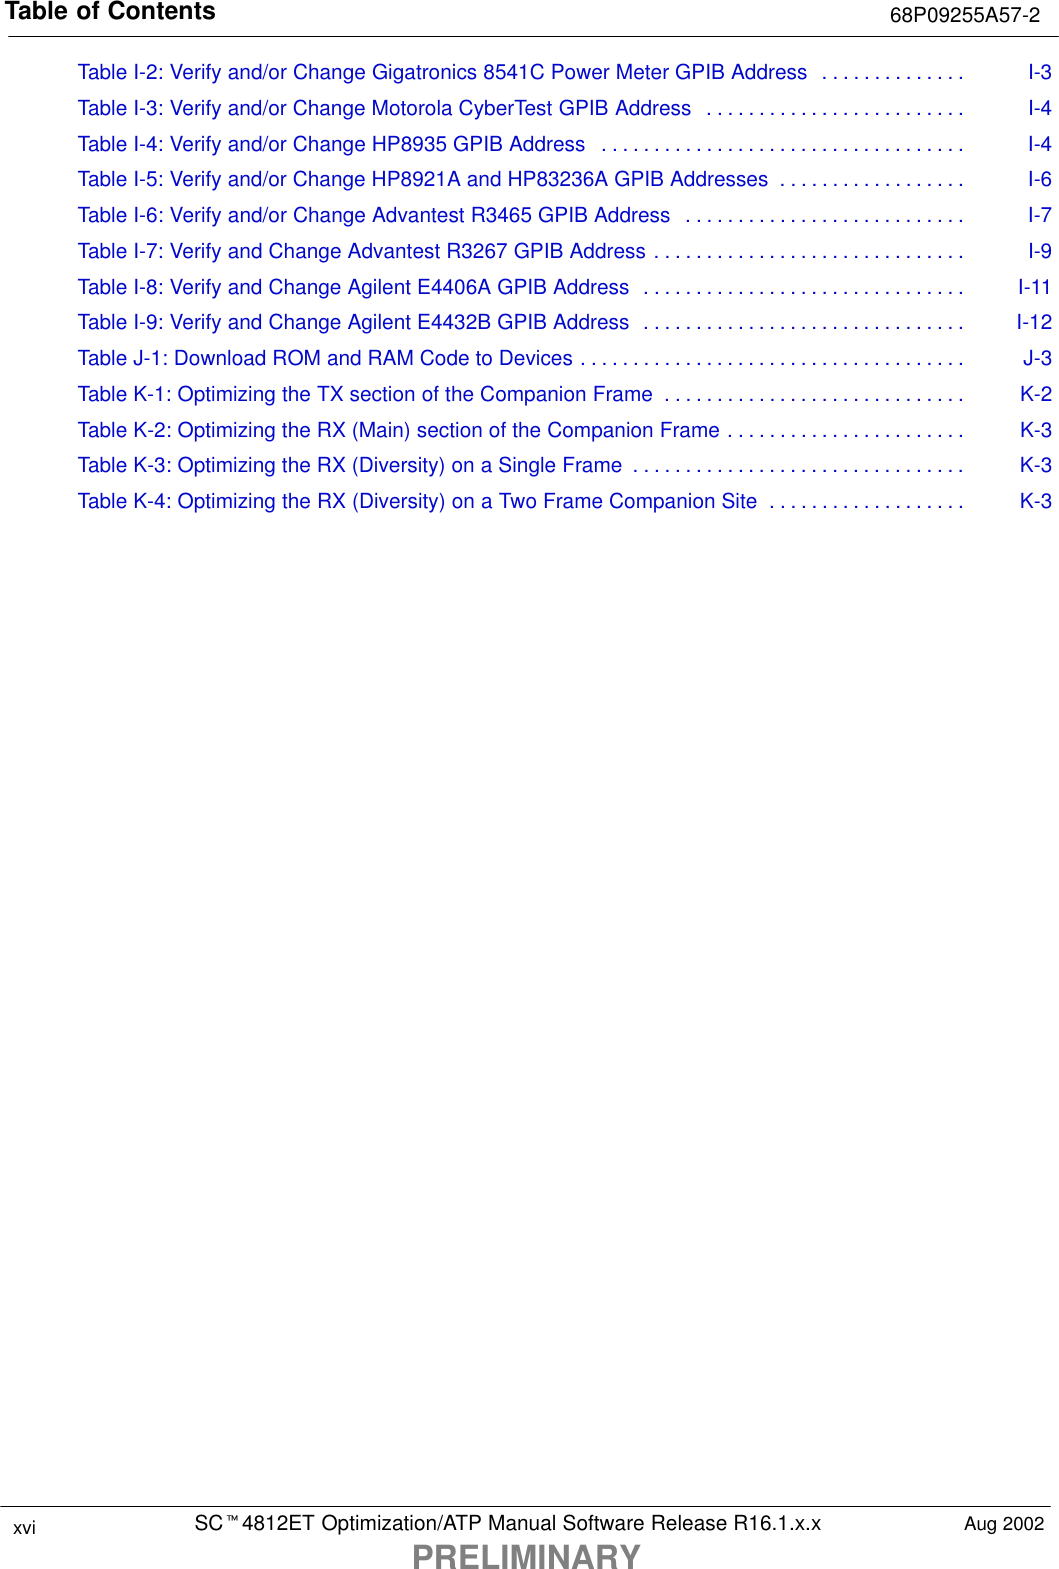 Table of Contents 68P09255A57-2SCt4812ET Optimization/ATP Manual Software Release R16.1.x.xPRELIMINARYxvi Aug 2002Table I-2: Verify and/or Change Gigatronics 8541C Power Meter GPIB Address I-3. . . . . . . . . . . . . . Table I-3: Verify and/or Change Motorola CyberTest GPIB Address I-4. . . . . . . . . . . . . . . . . . . . . . . . . Table I-4: Verify and/or Change HP8935 GPIB Address I-4. . . . . . . . . . . . . . . . . . . . . . . . . . . . . . . . . . . Table I-5: Verify and/or Change HP8921A and HP83236A GPIB Addresses I-6. . . . . . . . . . . . . . . . . . Table I-6: Verify and/or Change Advantest R3465 GPIB Address I-7. . . . . . . . . . . . . . . . . . . . . . . . . . . Table I-7: Verify and Change Advantest R3267 GPIB Address I-9. . . . . . . . . . . . . . . . . . . . . . . . . . . . . . Table I-8: Verify and Change Agilent E4406A GPIB Address I-11. . . . . . . . . . . . . . . . . . . . . . . . . . . . . . . Table I-9: Verify and Change Agilent E4432B GPIB Address I-12. . . . . . . . . . . . . . . . . . . . . . . . . . . . . . . Table J-1: Download ROM and RAM Code to Devices J-3. . . . . . . . . . . . . . . . . . . . . . . . . . . . . . . . . . . . . Table K-1: Optimizing the TX section of the Companion Frame K-2. . . . . . . . . . . . . . . . . . . . . . . . . . . . . Table K-2: Optimizing the RX (Main) section of the Companion Frame K-3. . . . . . . . . . . . . . . . . . . . . . . Table K-3: Optimizing the RX (Diversity) on a Single Frame K-3. . . . . . . . . . . . . . . . . . . . . . . . . . . . . . . . Table K-4: Optimizing the RX (Diversity) on a Two Frame Companion Site K-3. . . . . . . . . . . . . . . . . . . 